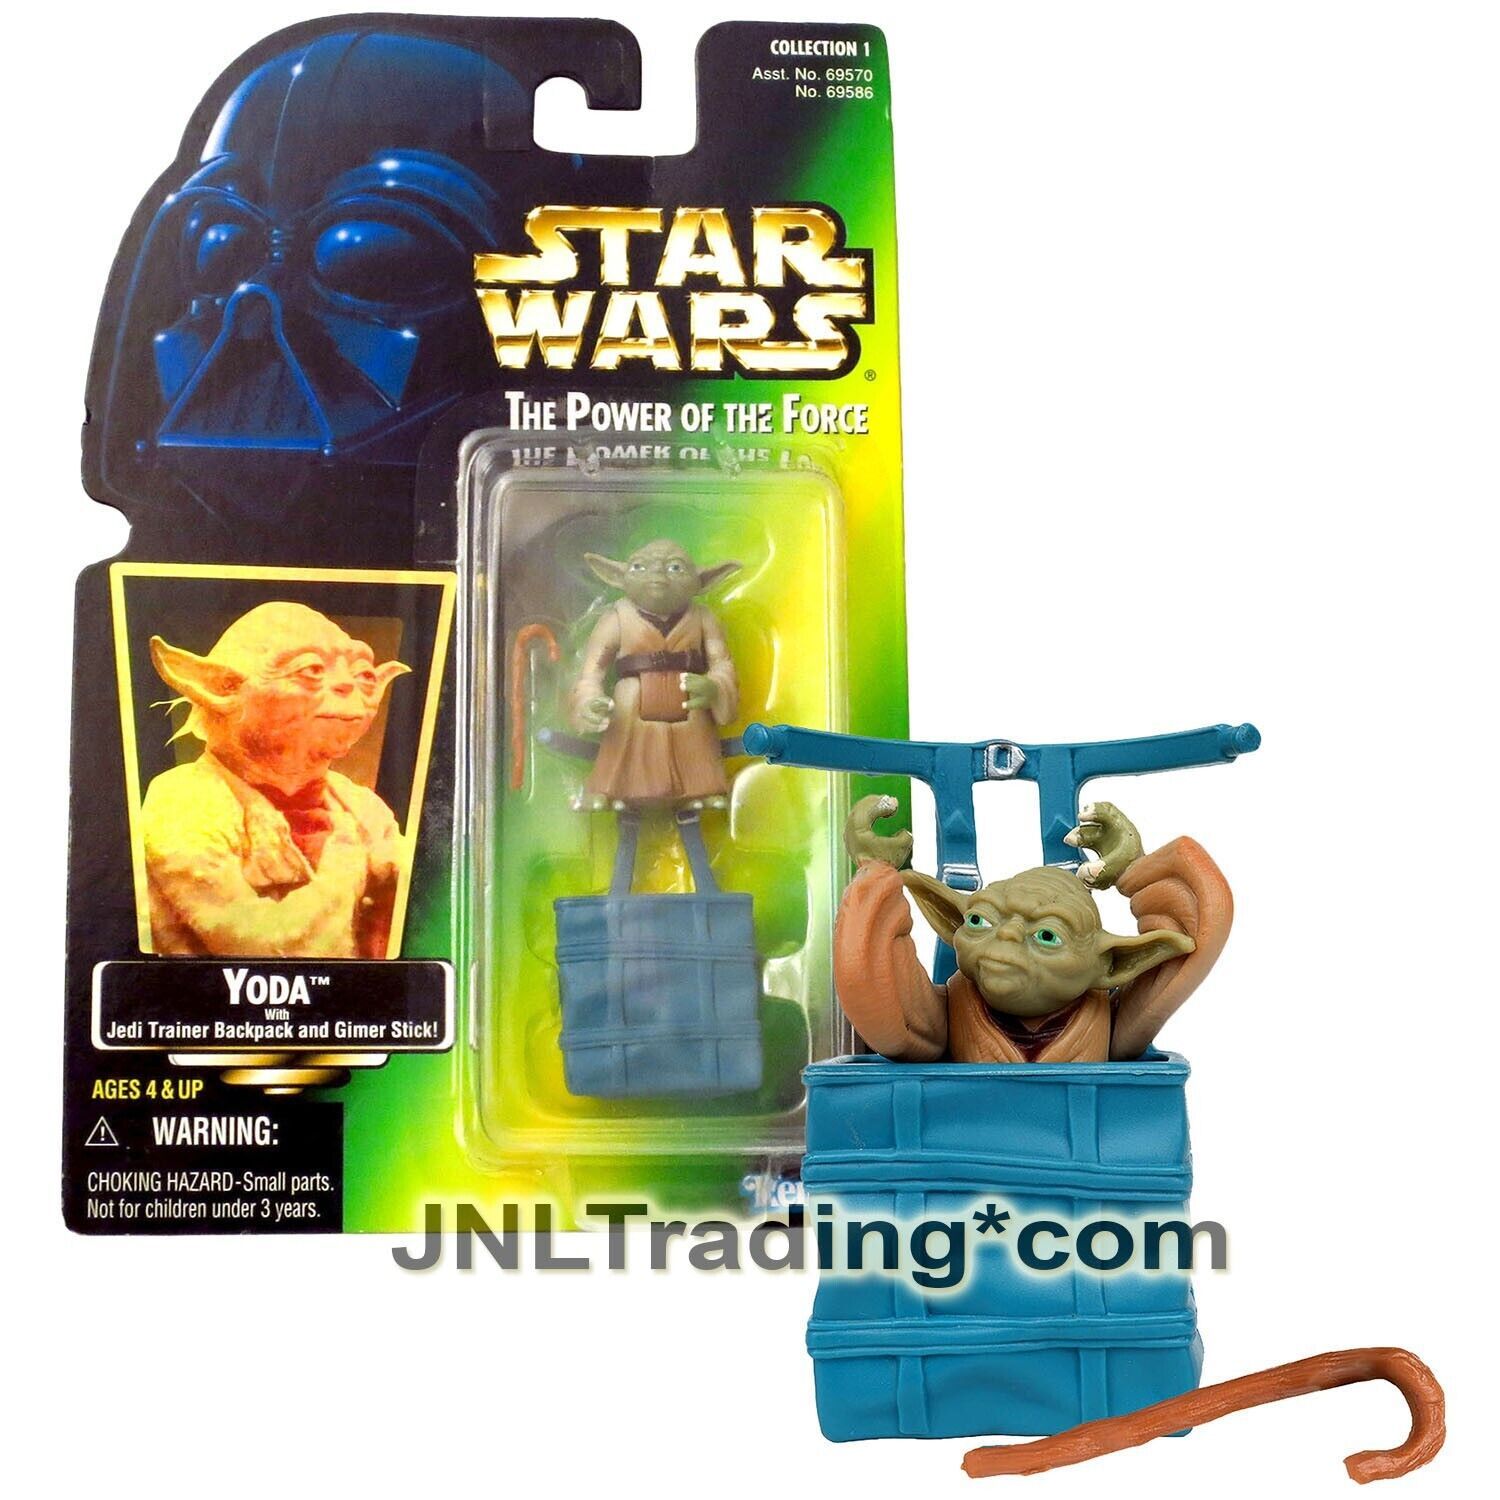 Primary image for Year 1997 Star Wars Power of The Force Figure - YODA with Jedi Trainer Backpack